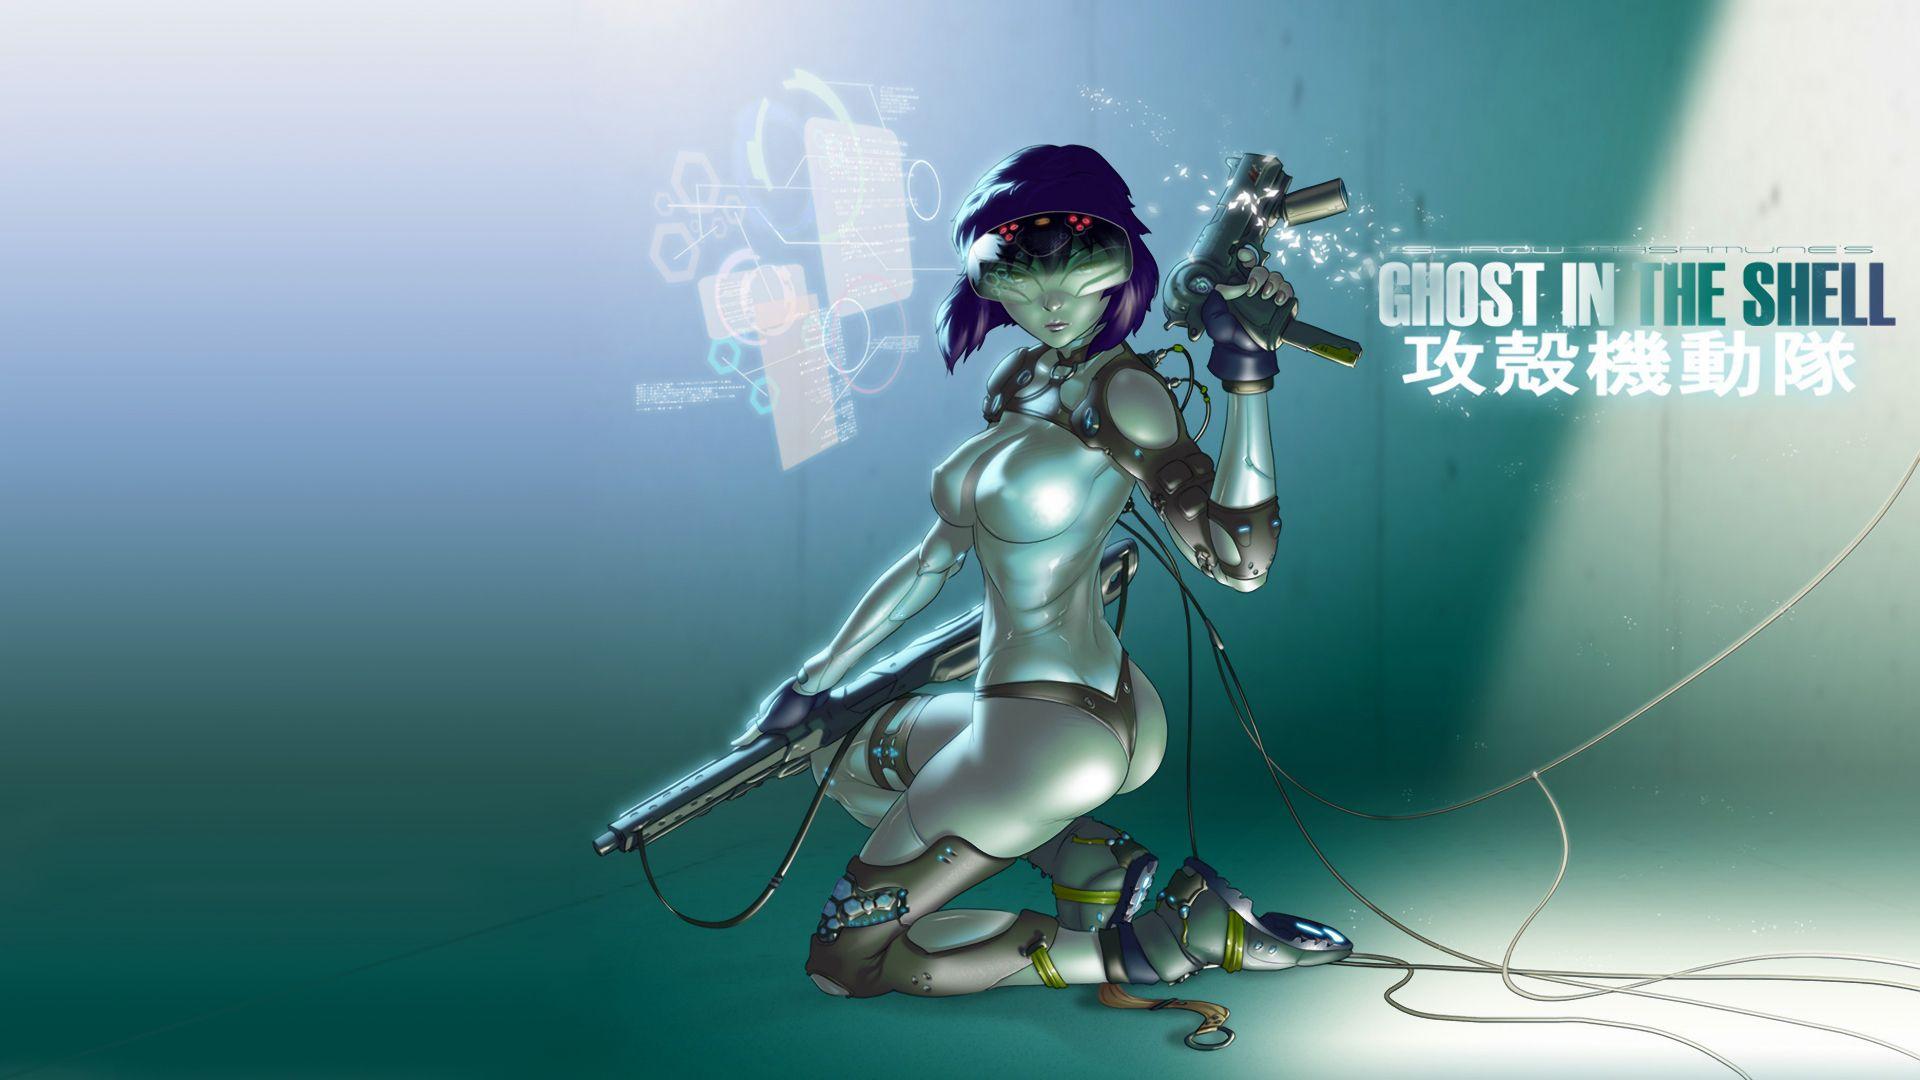 Ghost In The Shell City Wallpapers Top Free Ghost In The Shell City